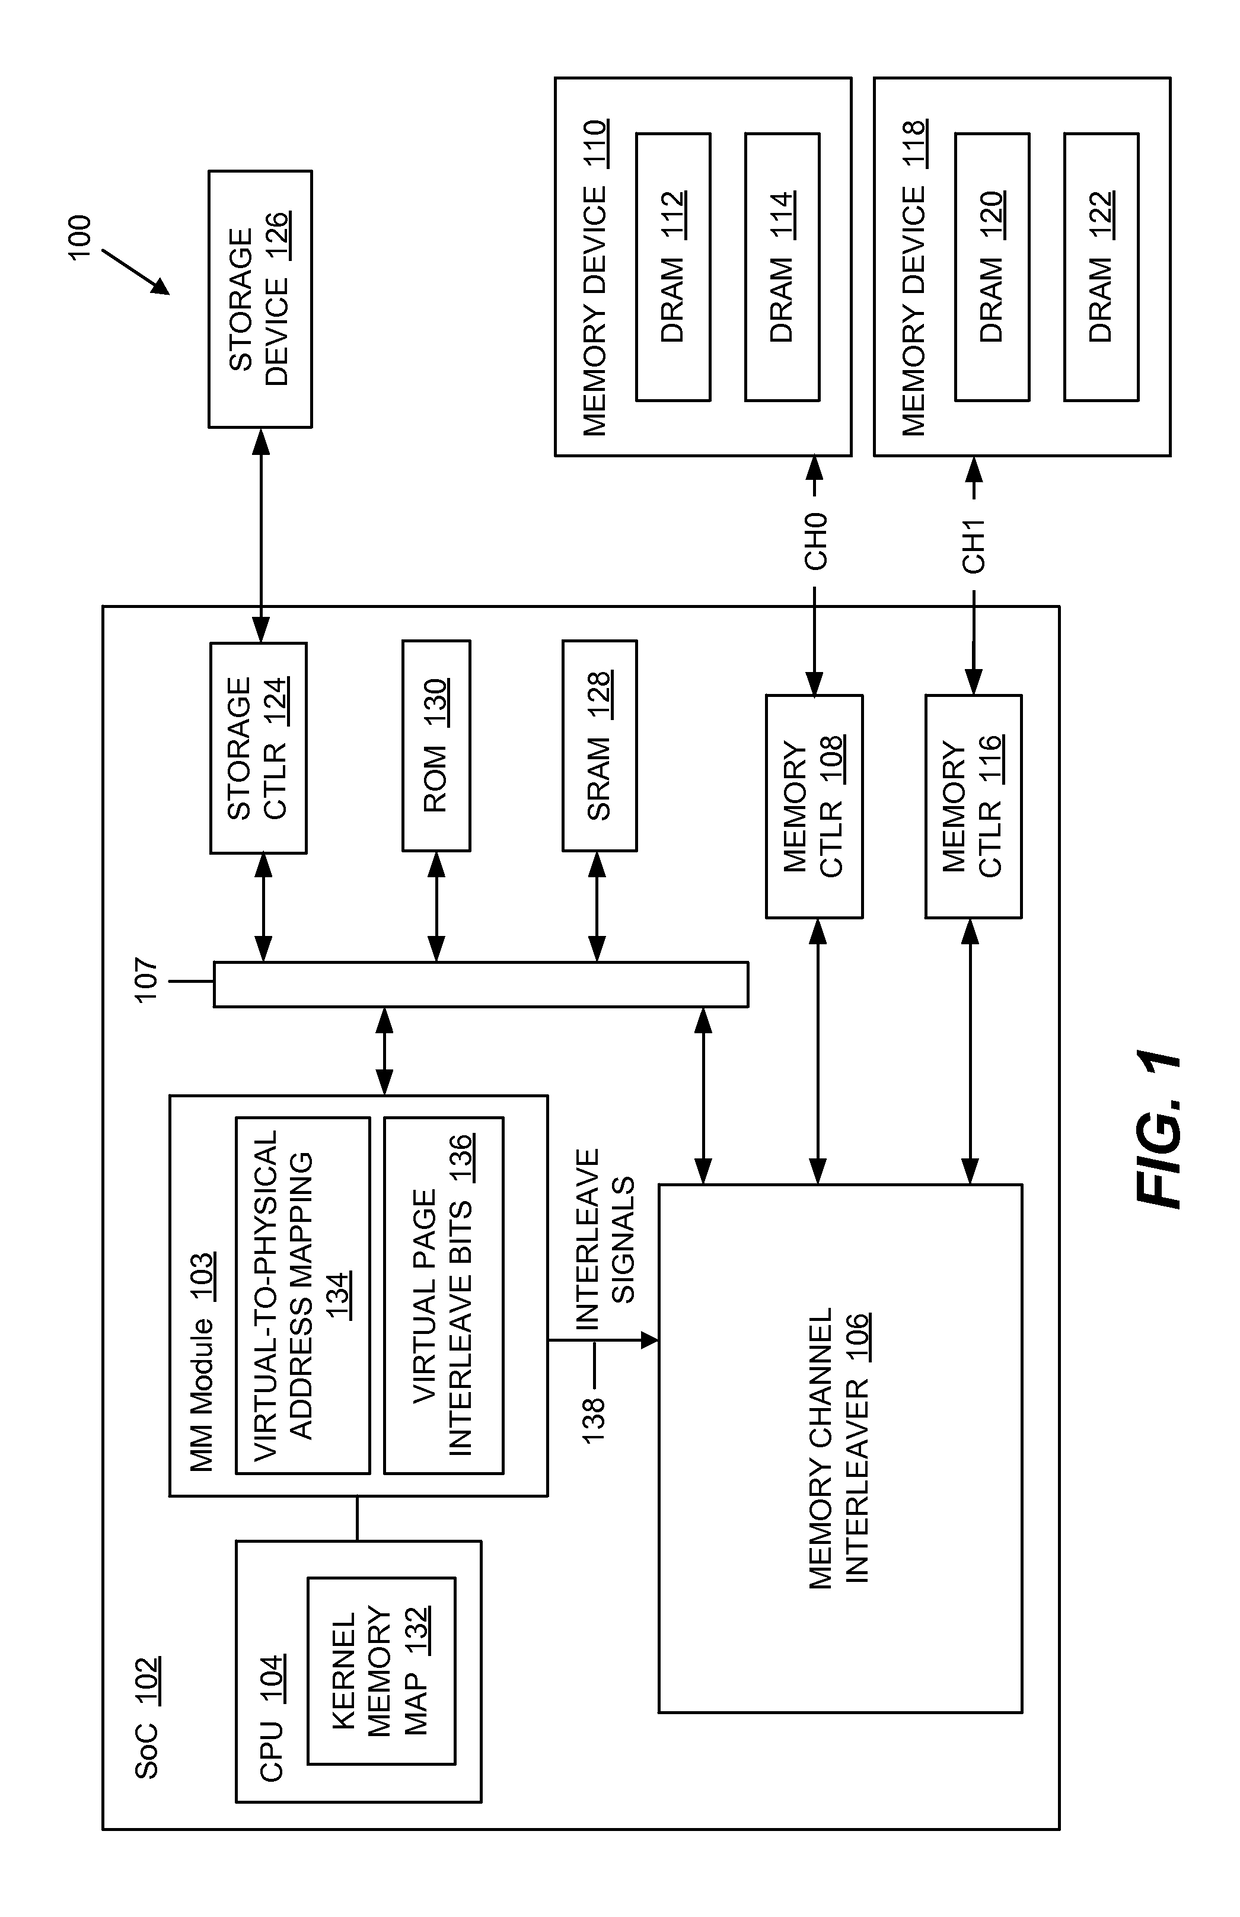 System and method for memory management using dynamic partial channel interleaving